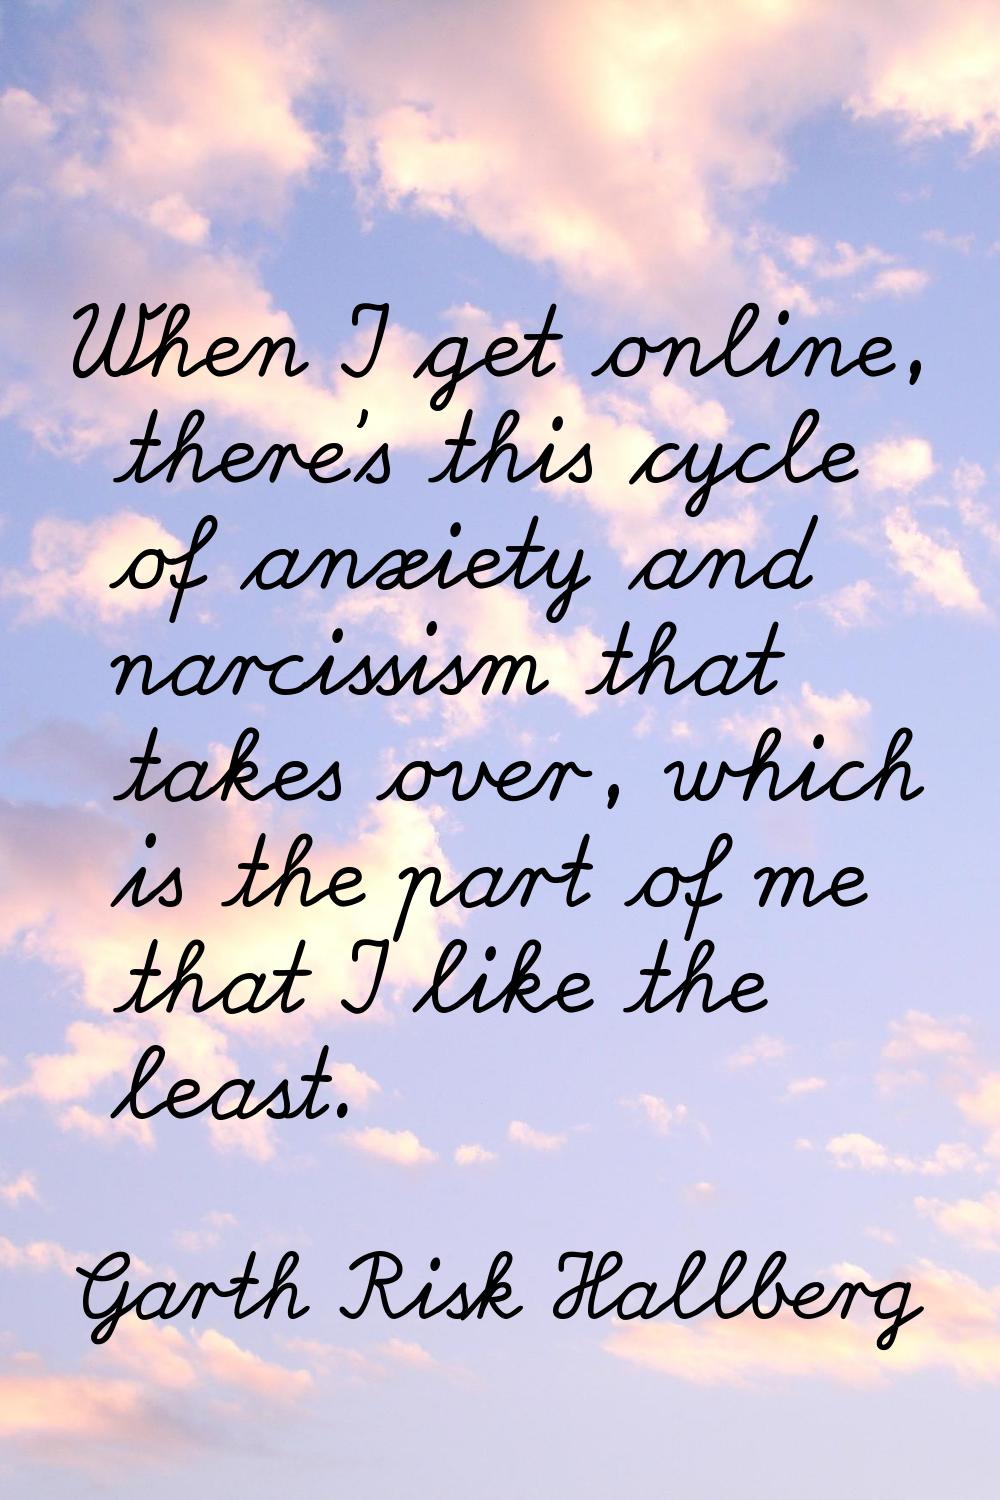 When I get online, there's this cycle of anxiety and narcissism that takes over, which is the part 